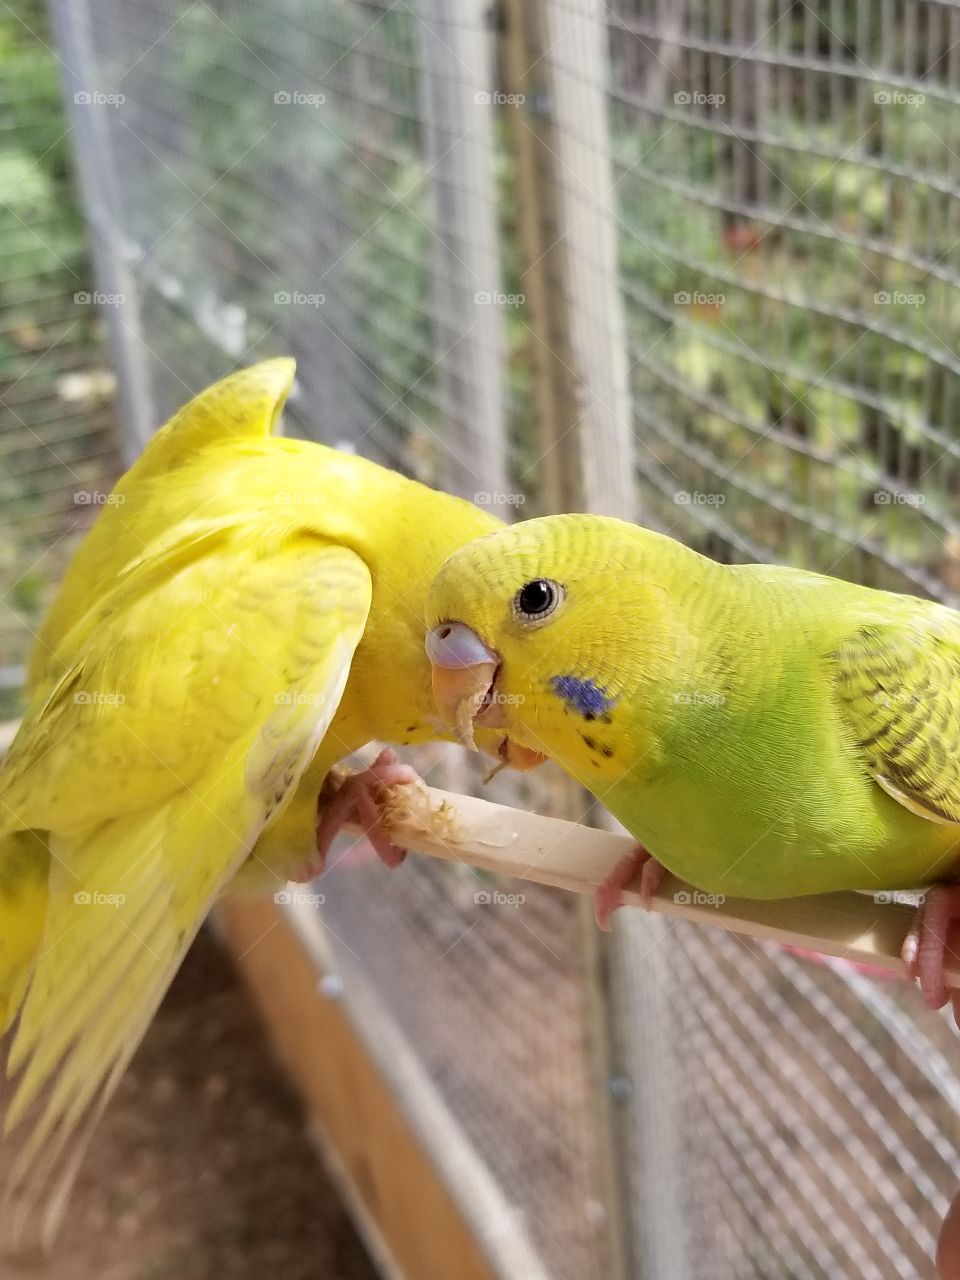 Sharing a Snack